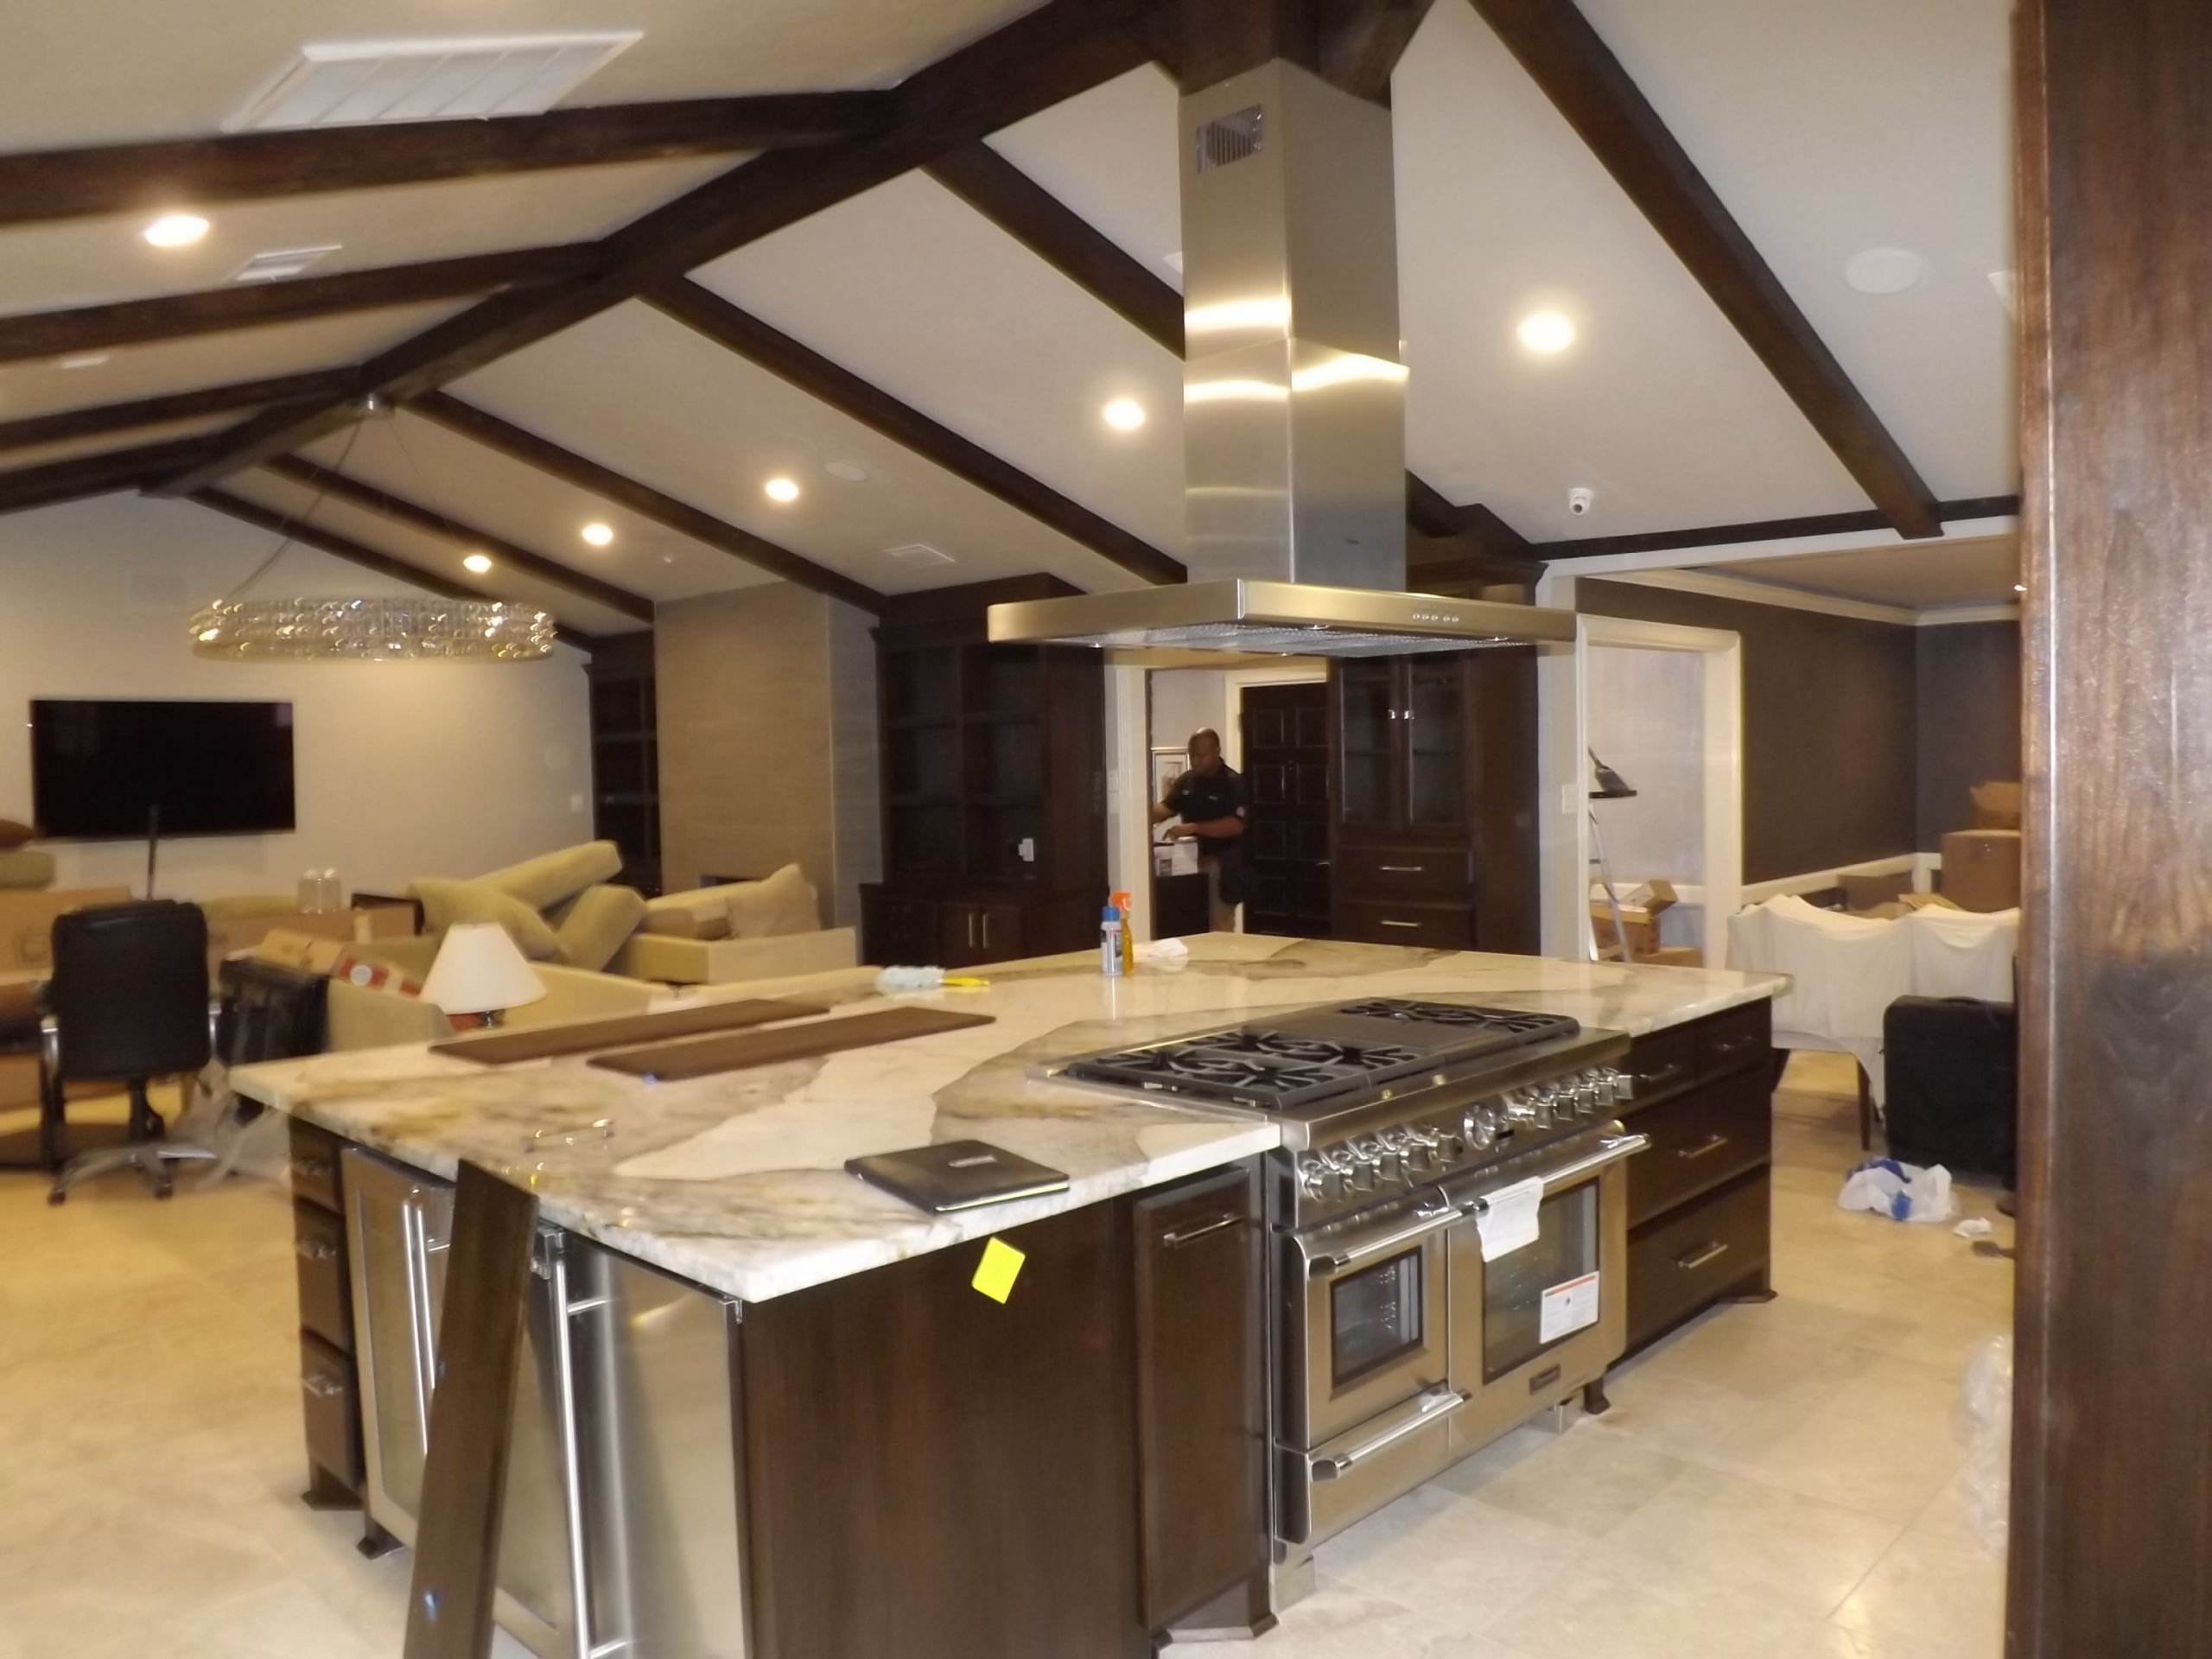 Kitchen Remodelers Houston Tx
 Kitchen Remodeling Houston Greater Texas Builders